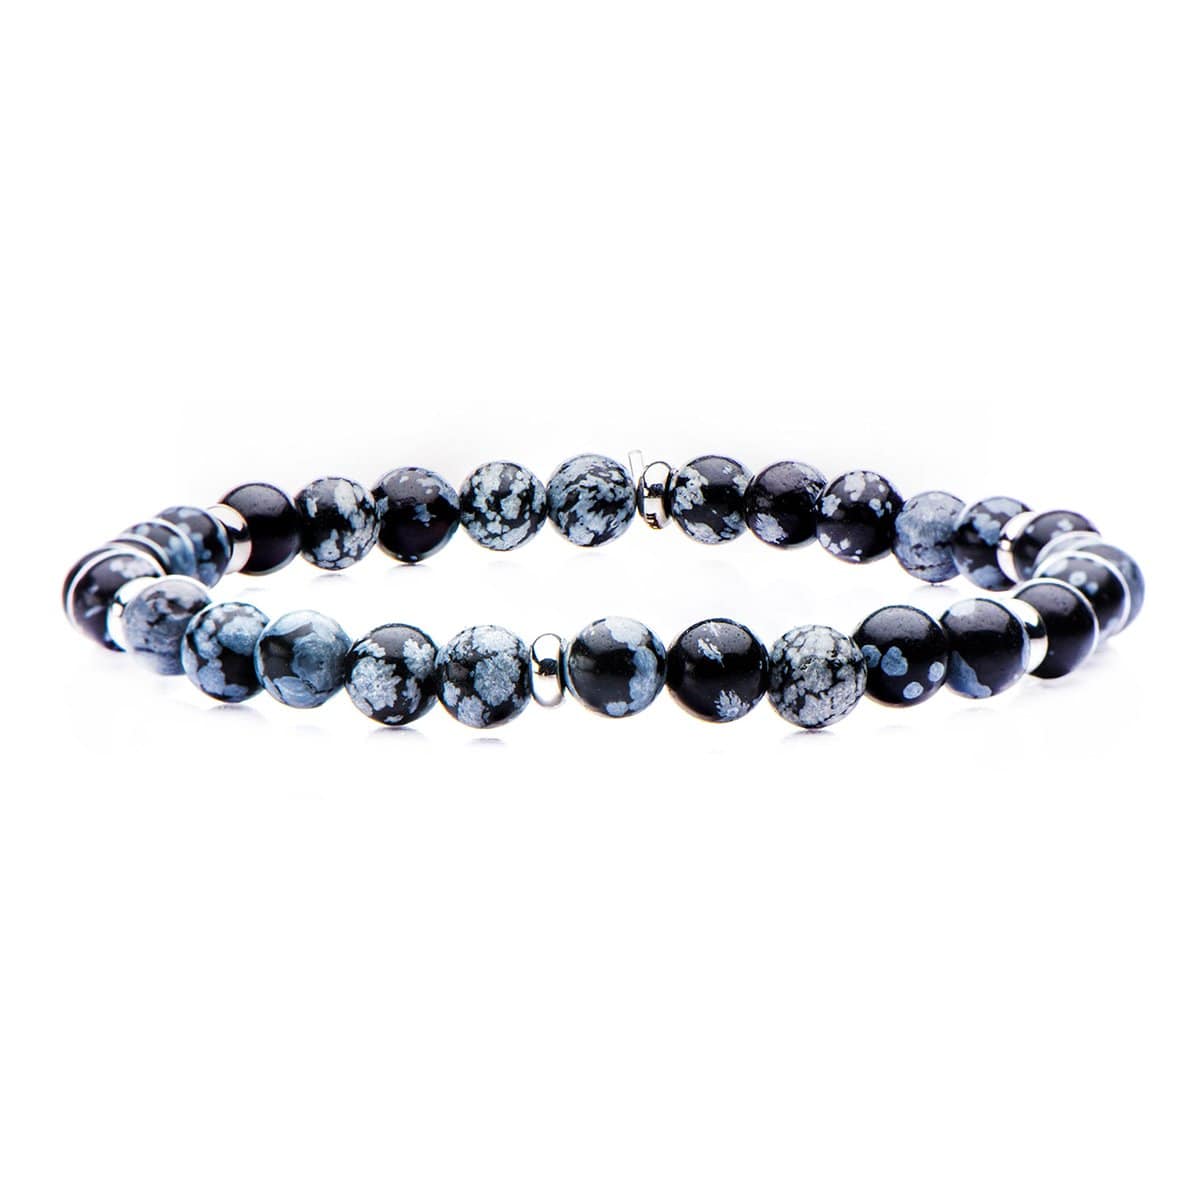 INOX JEWELRY Bracelets Silver Tone Stainless Steel with Blue Snowflake Stone 6mm Bead Stackable Bracelet BRSS001GRY